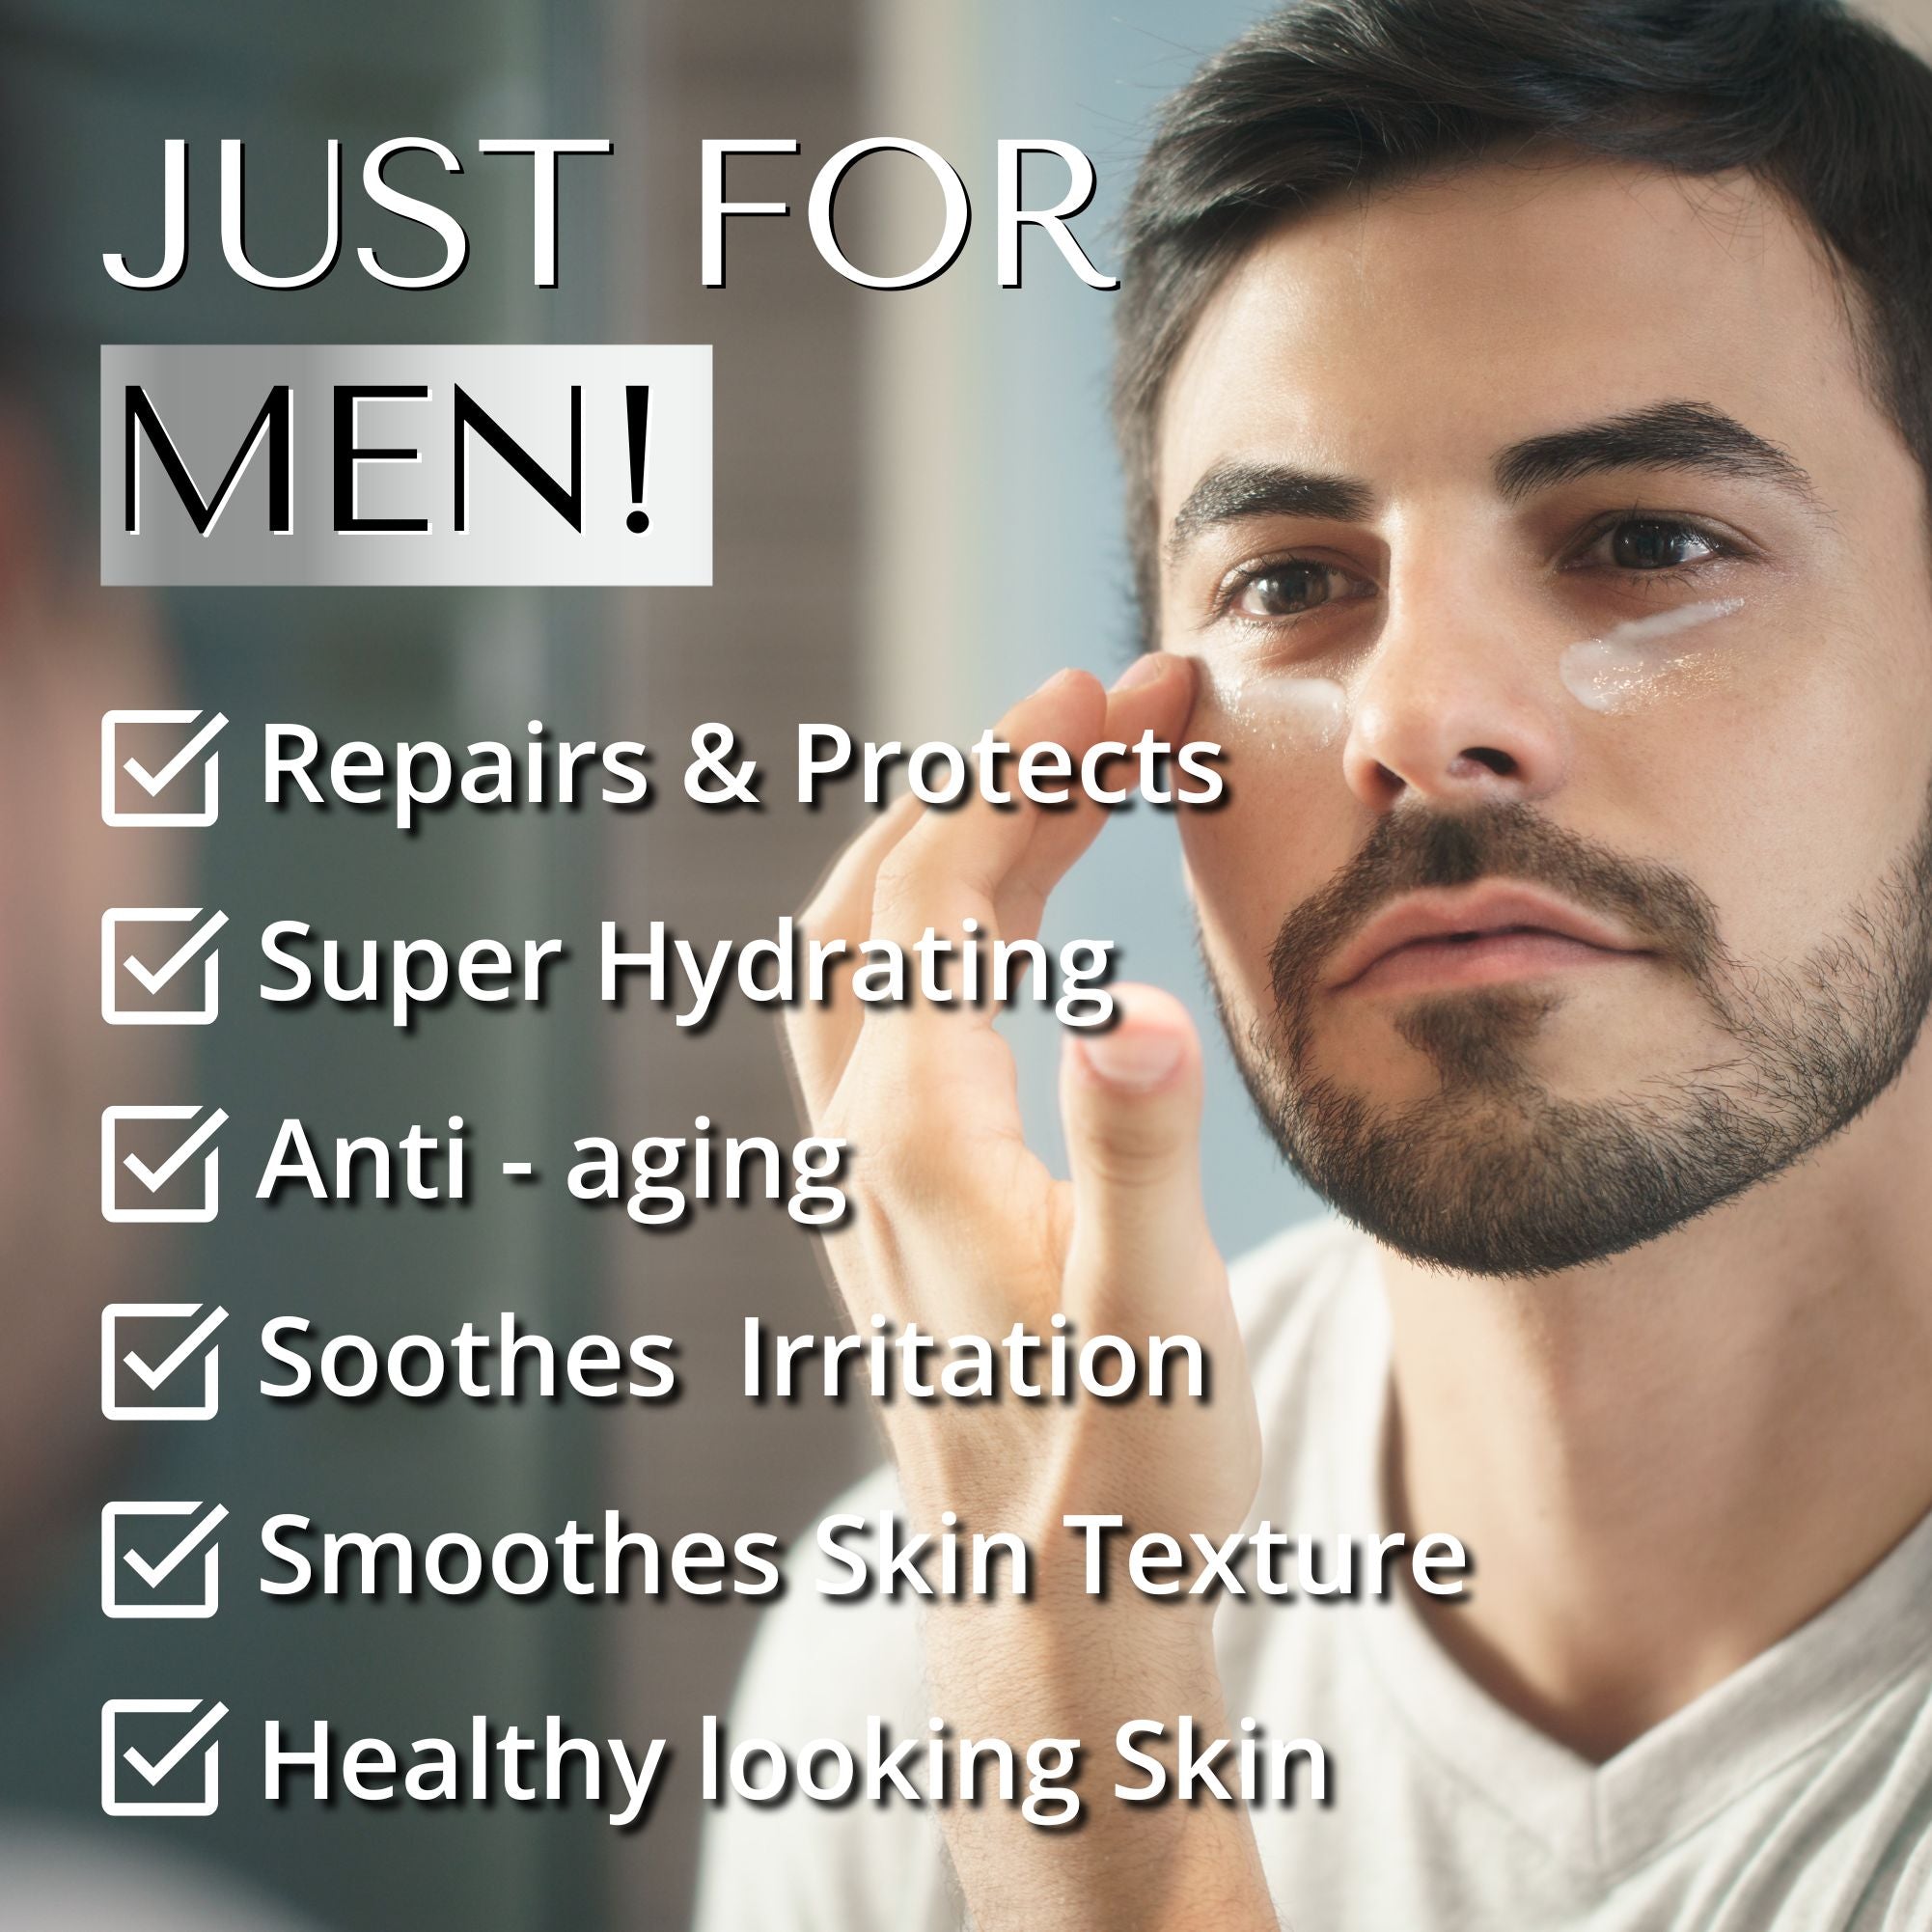 A moisturiser just for men that’s super hydrating and anti-aging. An expert face cream that repairs and protects, soothes irritation and smooths skin texture.